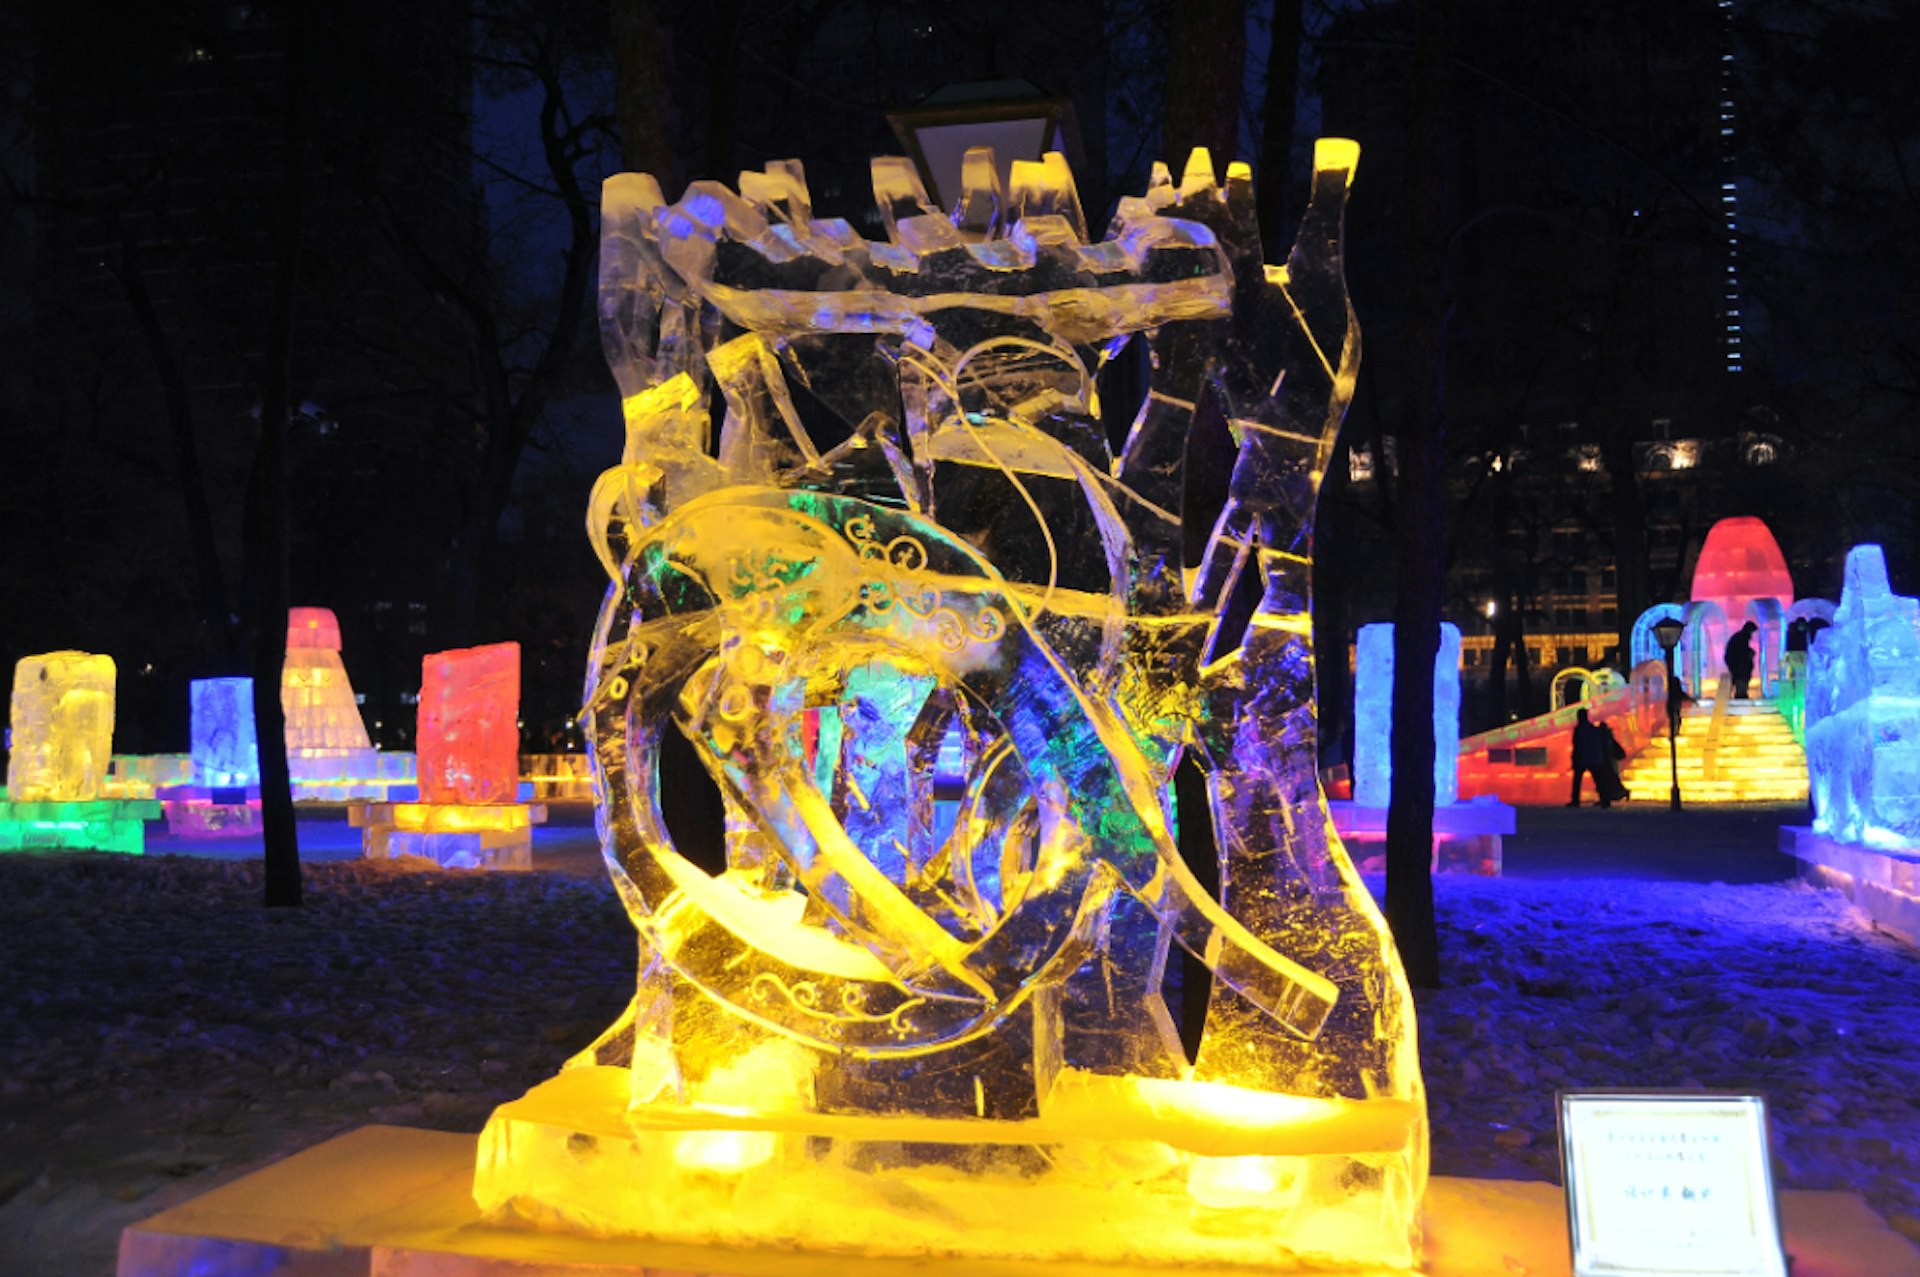 Illuminated ice sculptures at the Harbin Snow and Ice Festival in China